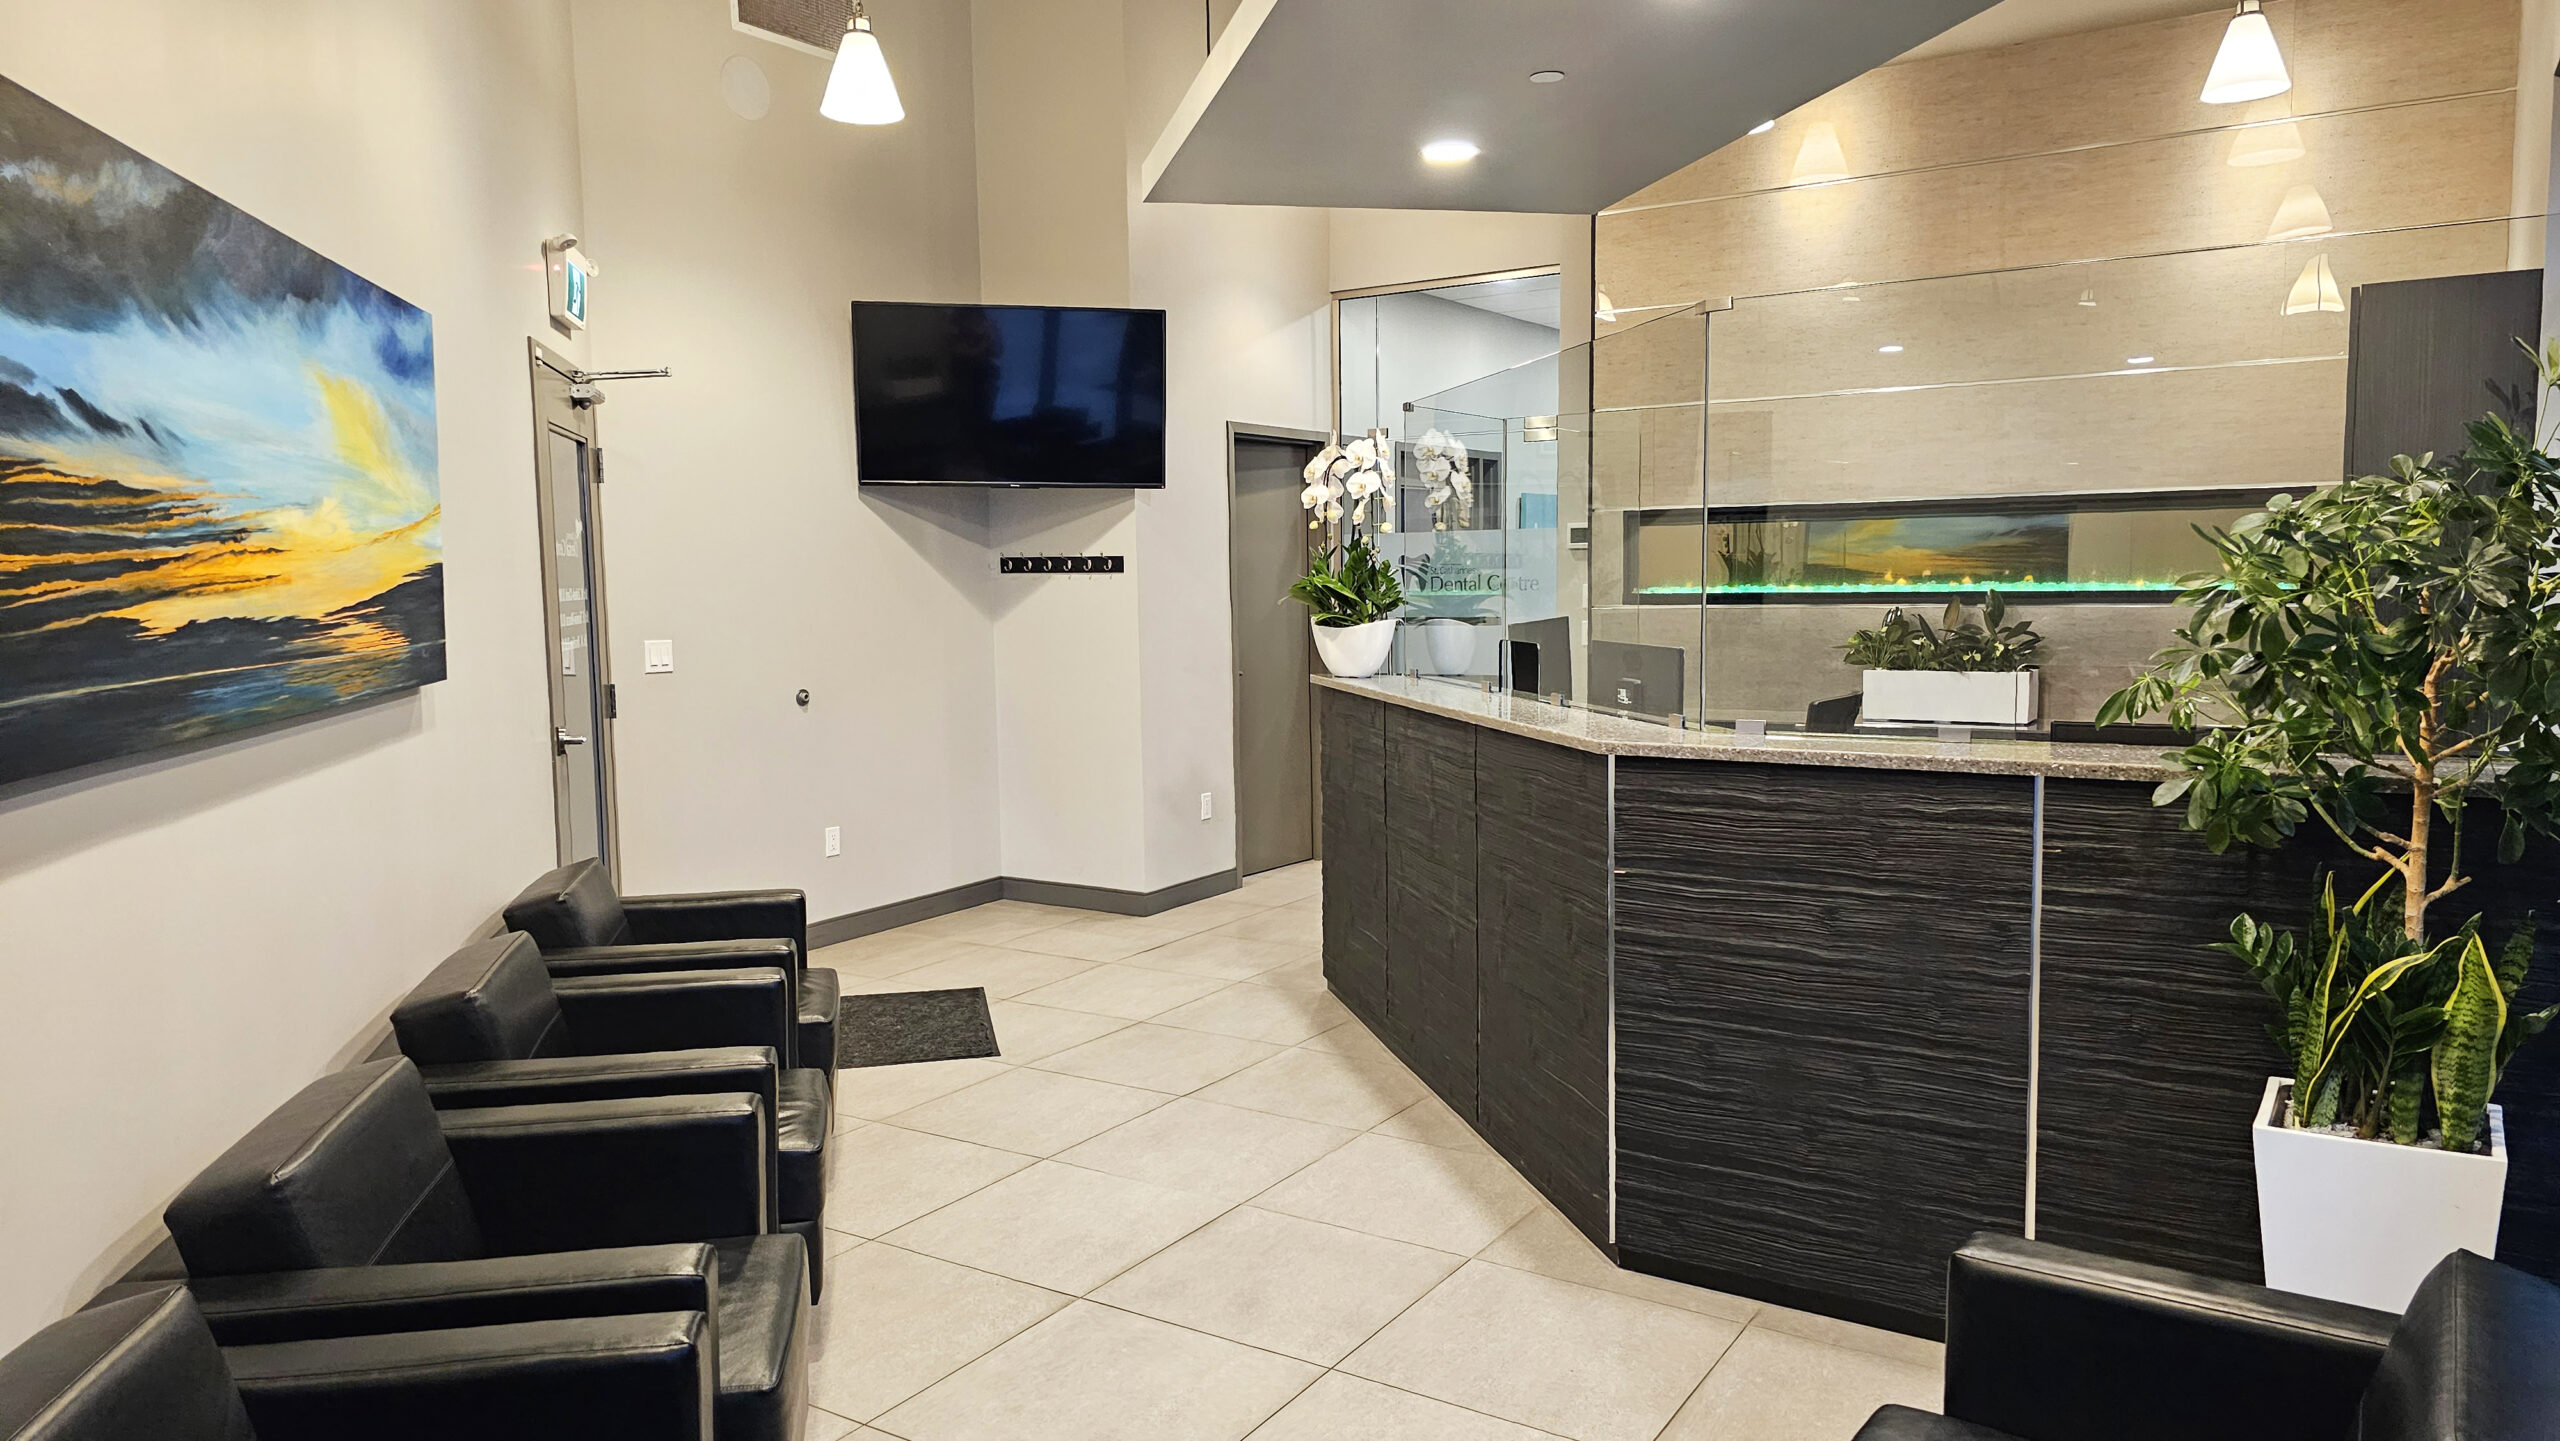 Reception area in St. Catharines Dental Centre